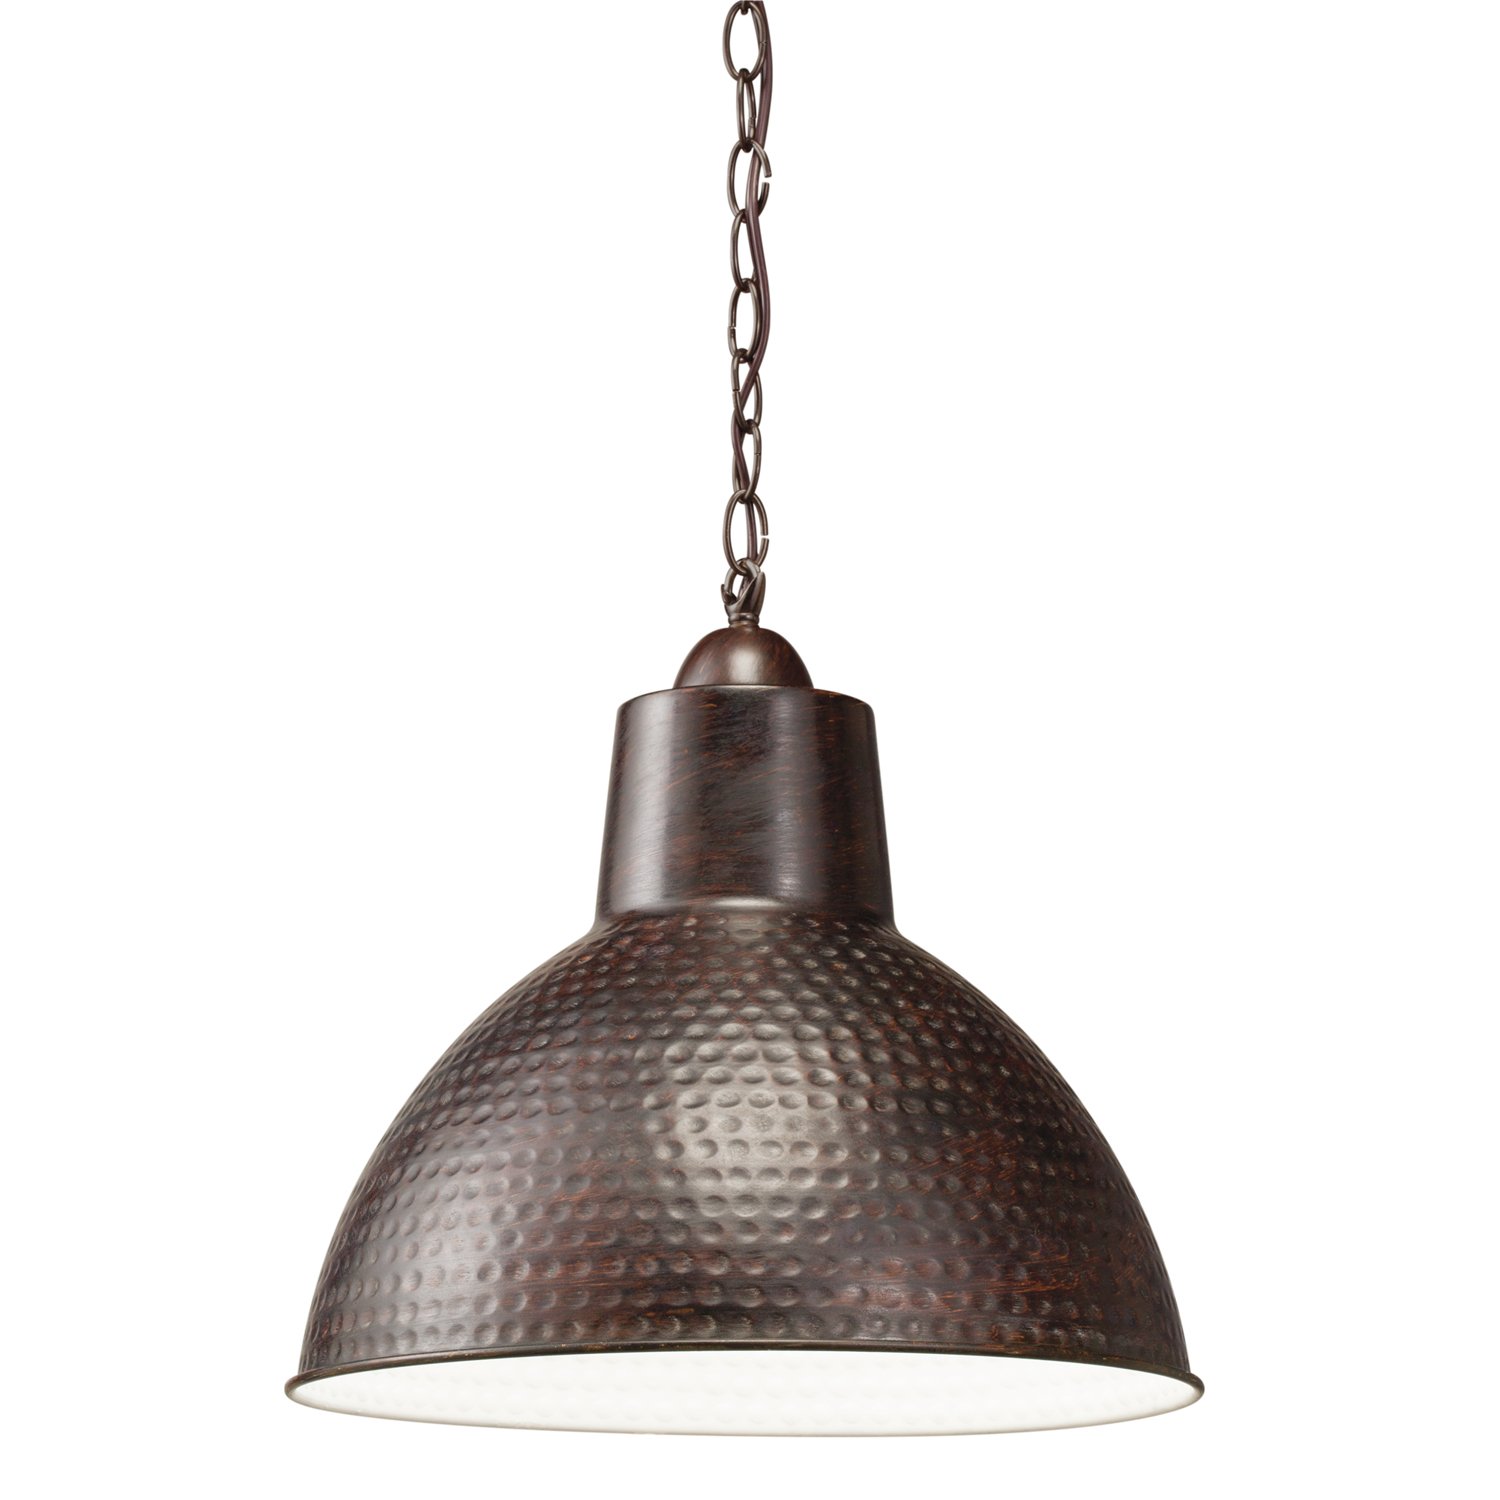 This refined 1 light Missoula(TM) lamp features a classic Bronze finish and metal detailing to create an elegant accent for any space in your home.